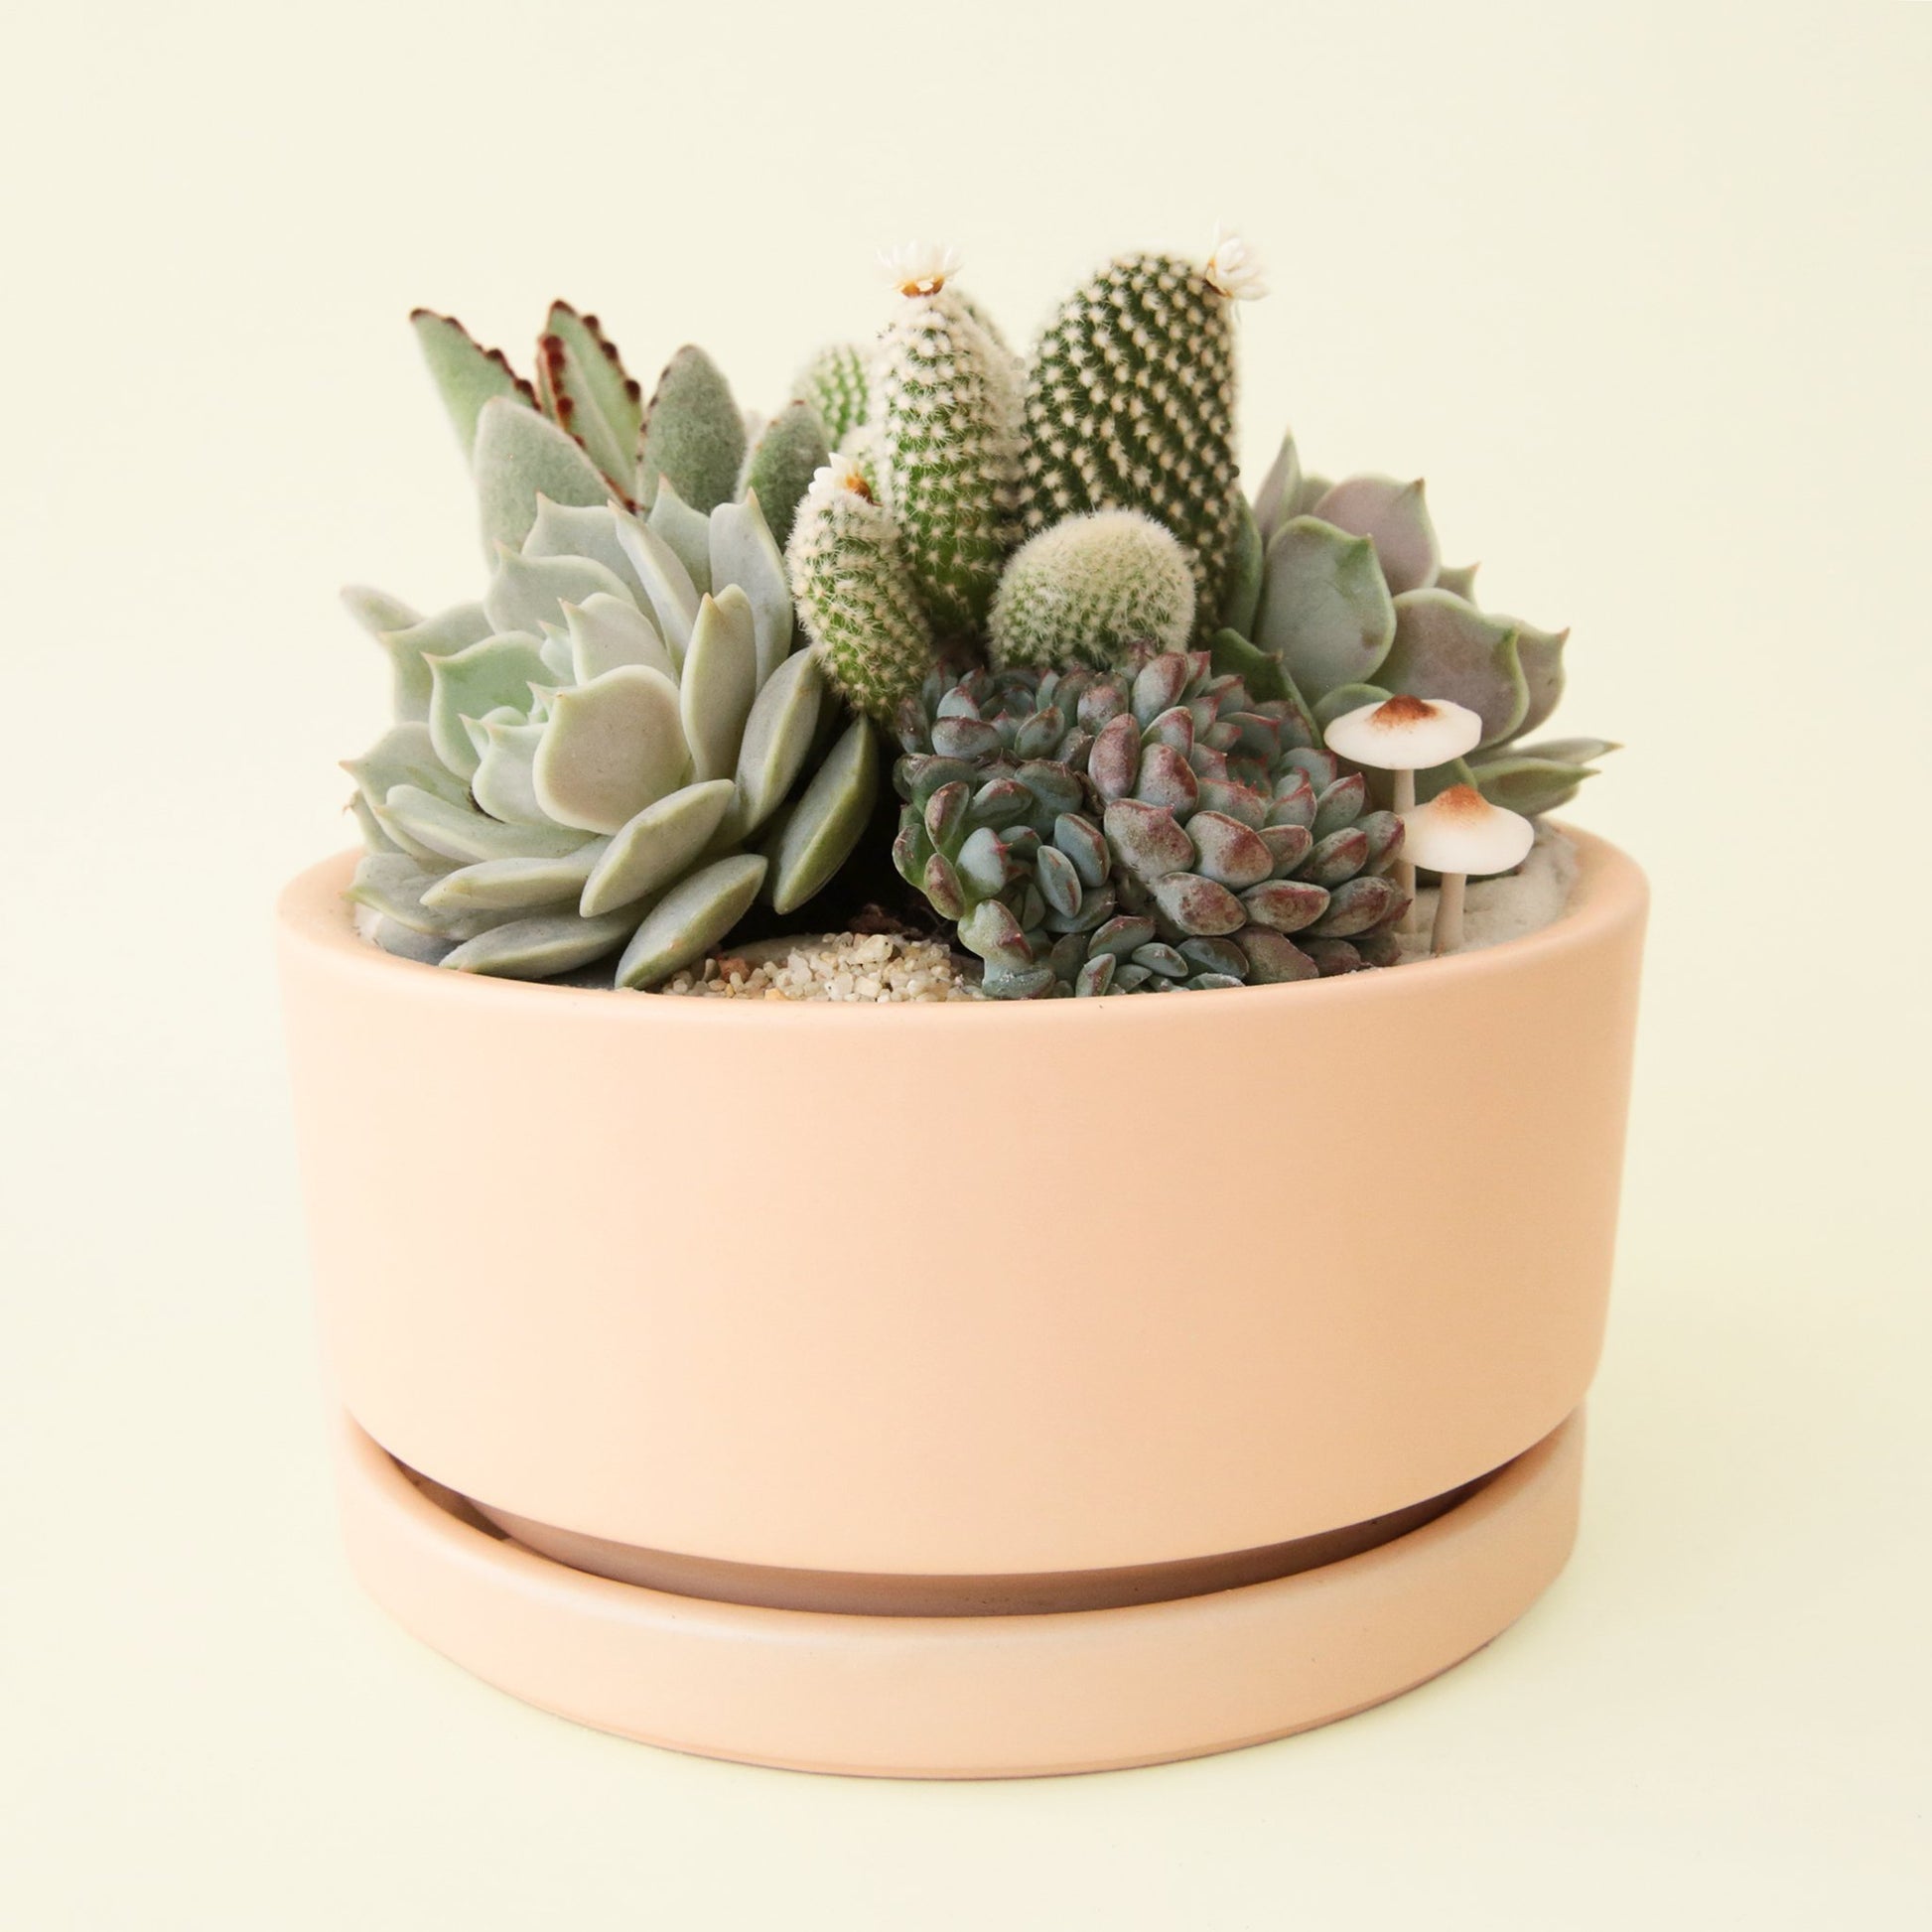 Large succulent planting arrangement planted in soft orange low bowl. The bowl is filled with a variety of cacti, succulents and baby mushrooms.